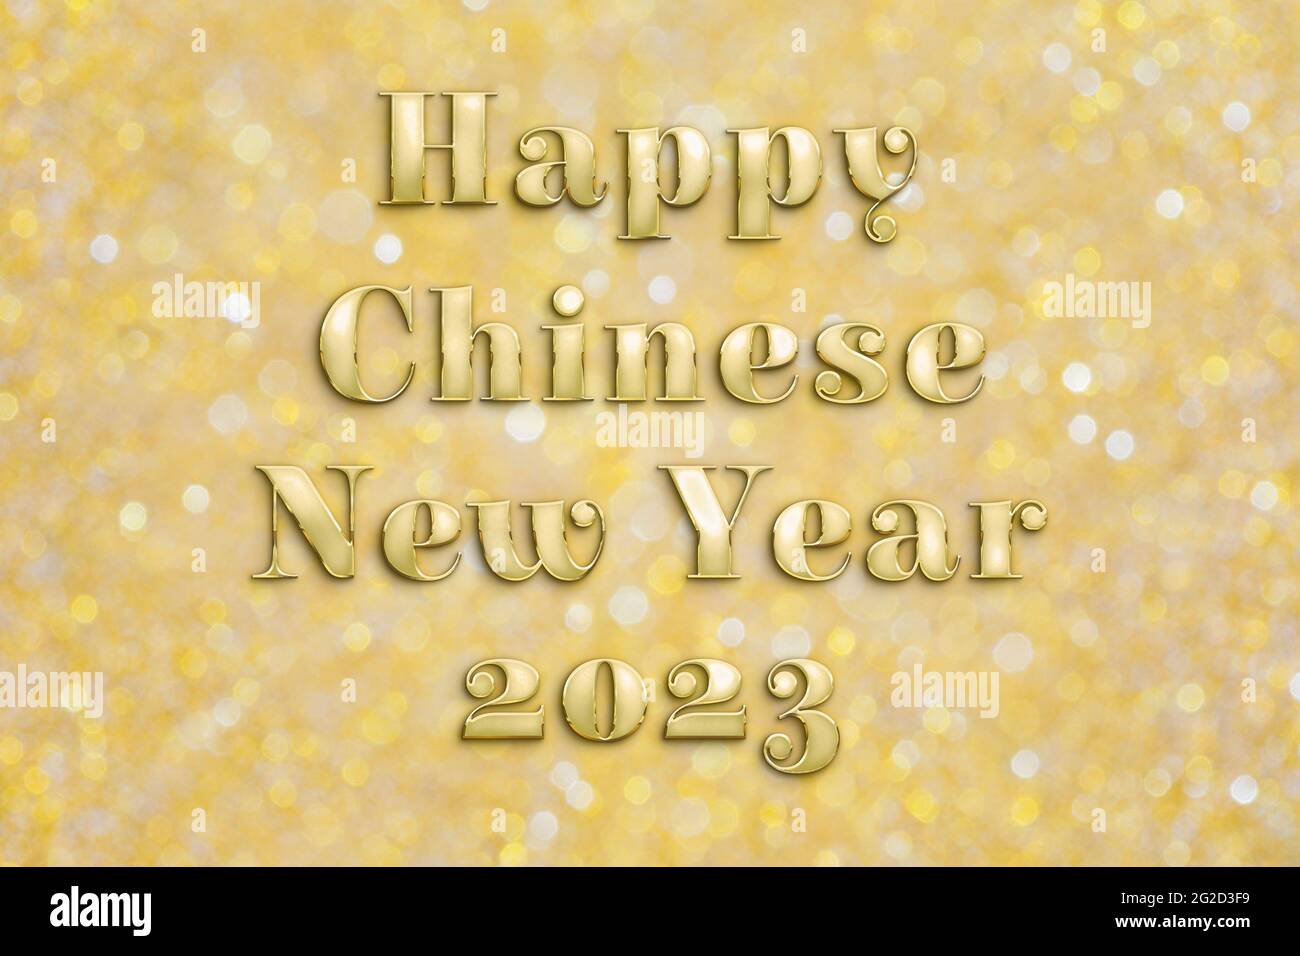 'Happy Chinese New Year 2023' text in golden letters over shiny gold colored blurred bokeh glitter background. Stock Photo